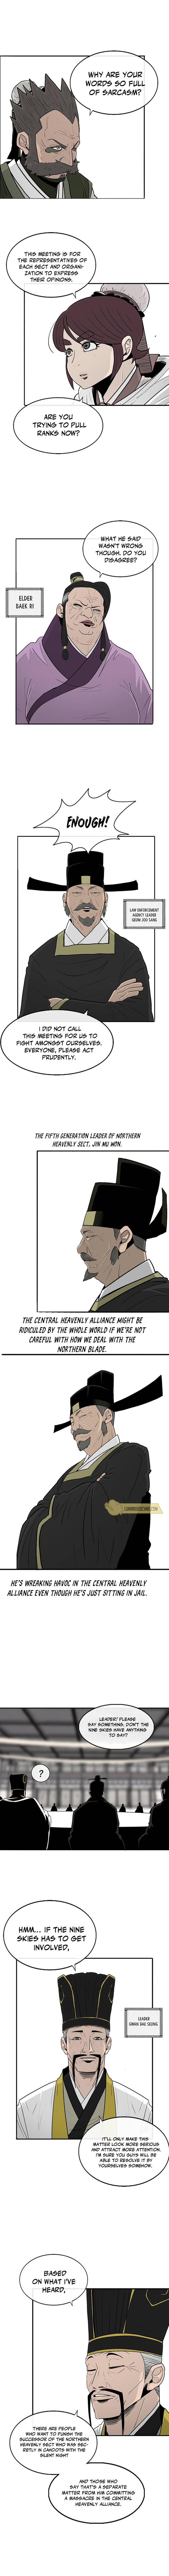 legend of the northern blade chapter